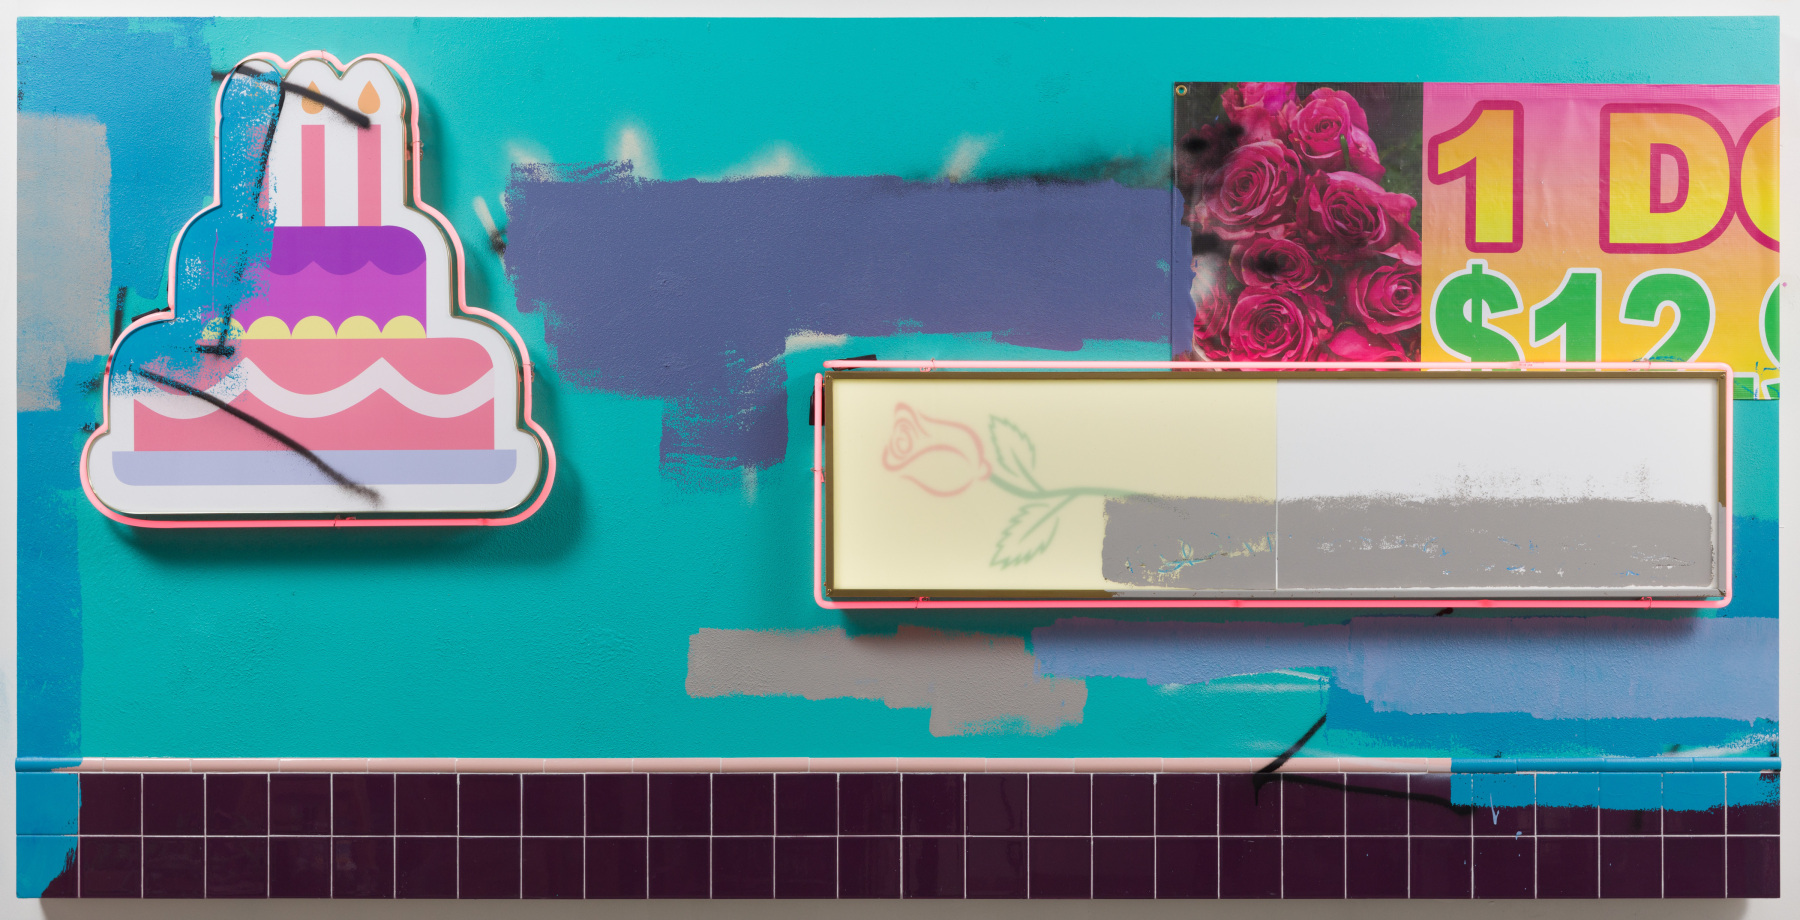 Cake and Roses, 2019
Stucco, neon, mean streak, spray paint, latex house paint, ceramic tile, found tarp, and store sign with vinyl decal on panel
60 x 120 x 5 inches